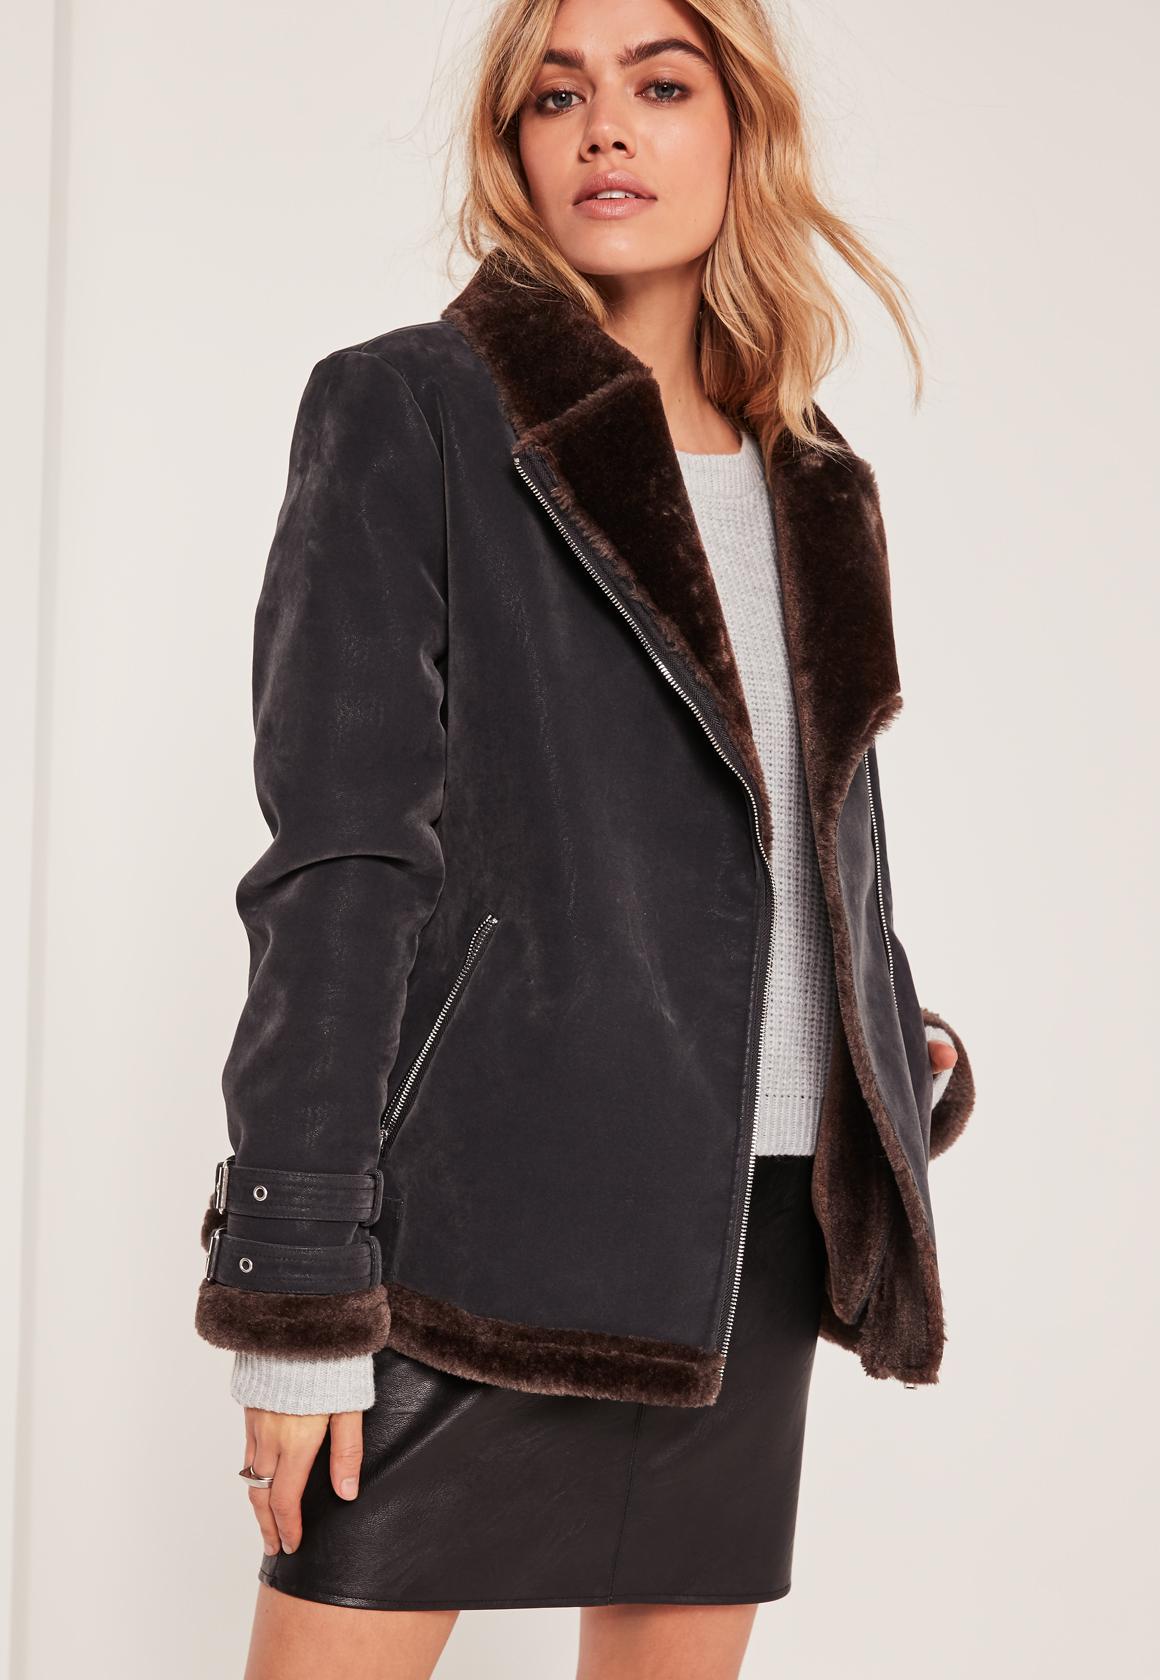 Lyst - Missguided Black And Brown Faux Fur Lined Aviator Jacket in Black